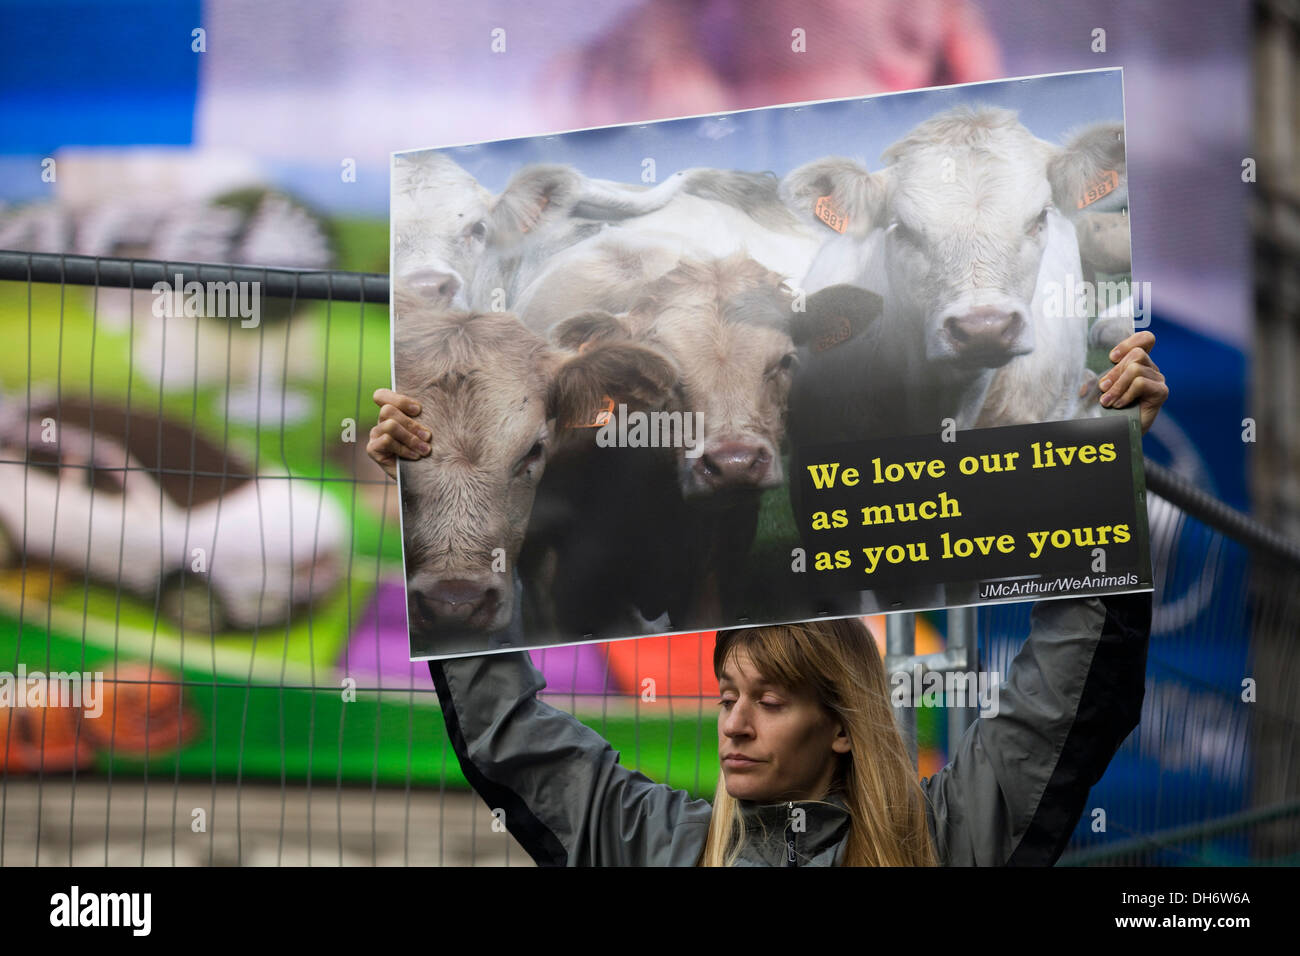 London Animal Rights Protesters Piccadilly Circus Stock Photo